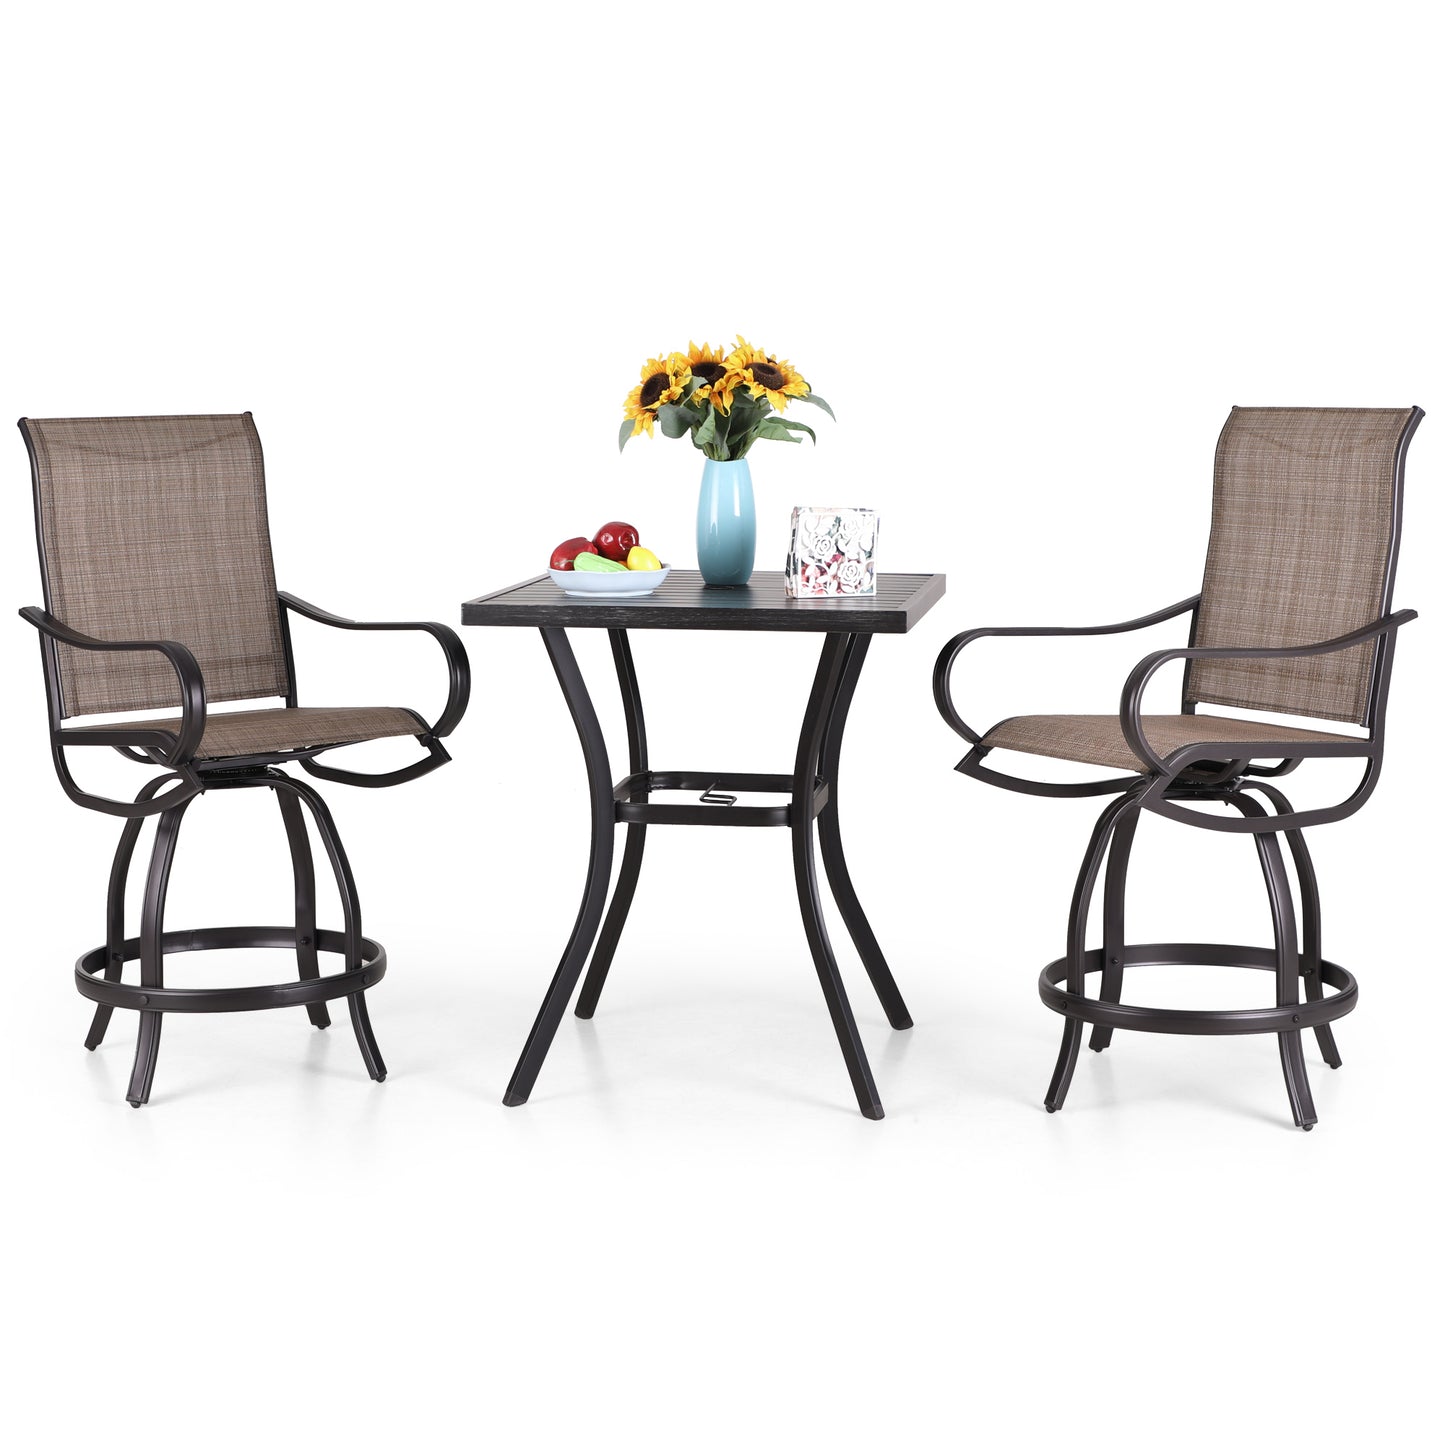 Sophia & William 3 Pieces Outdoor Metal Bar Stools and Table Set-Brown